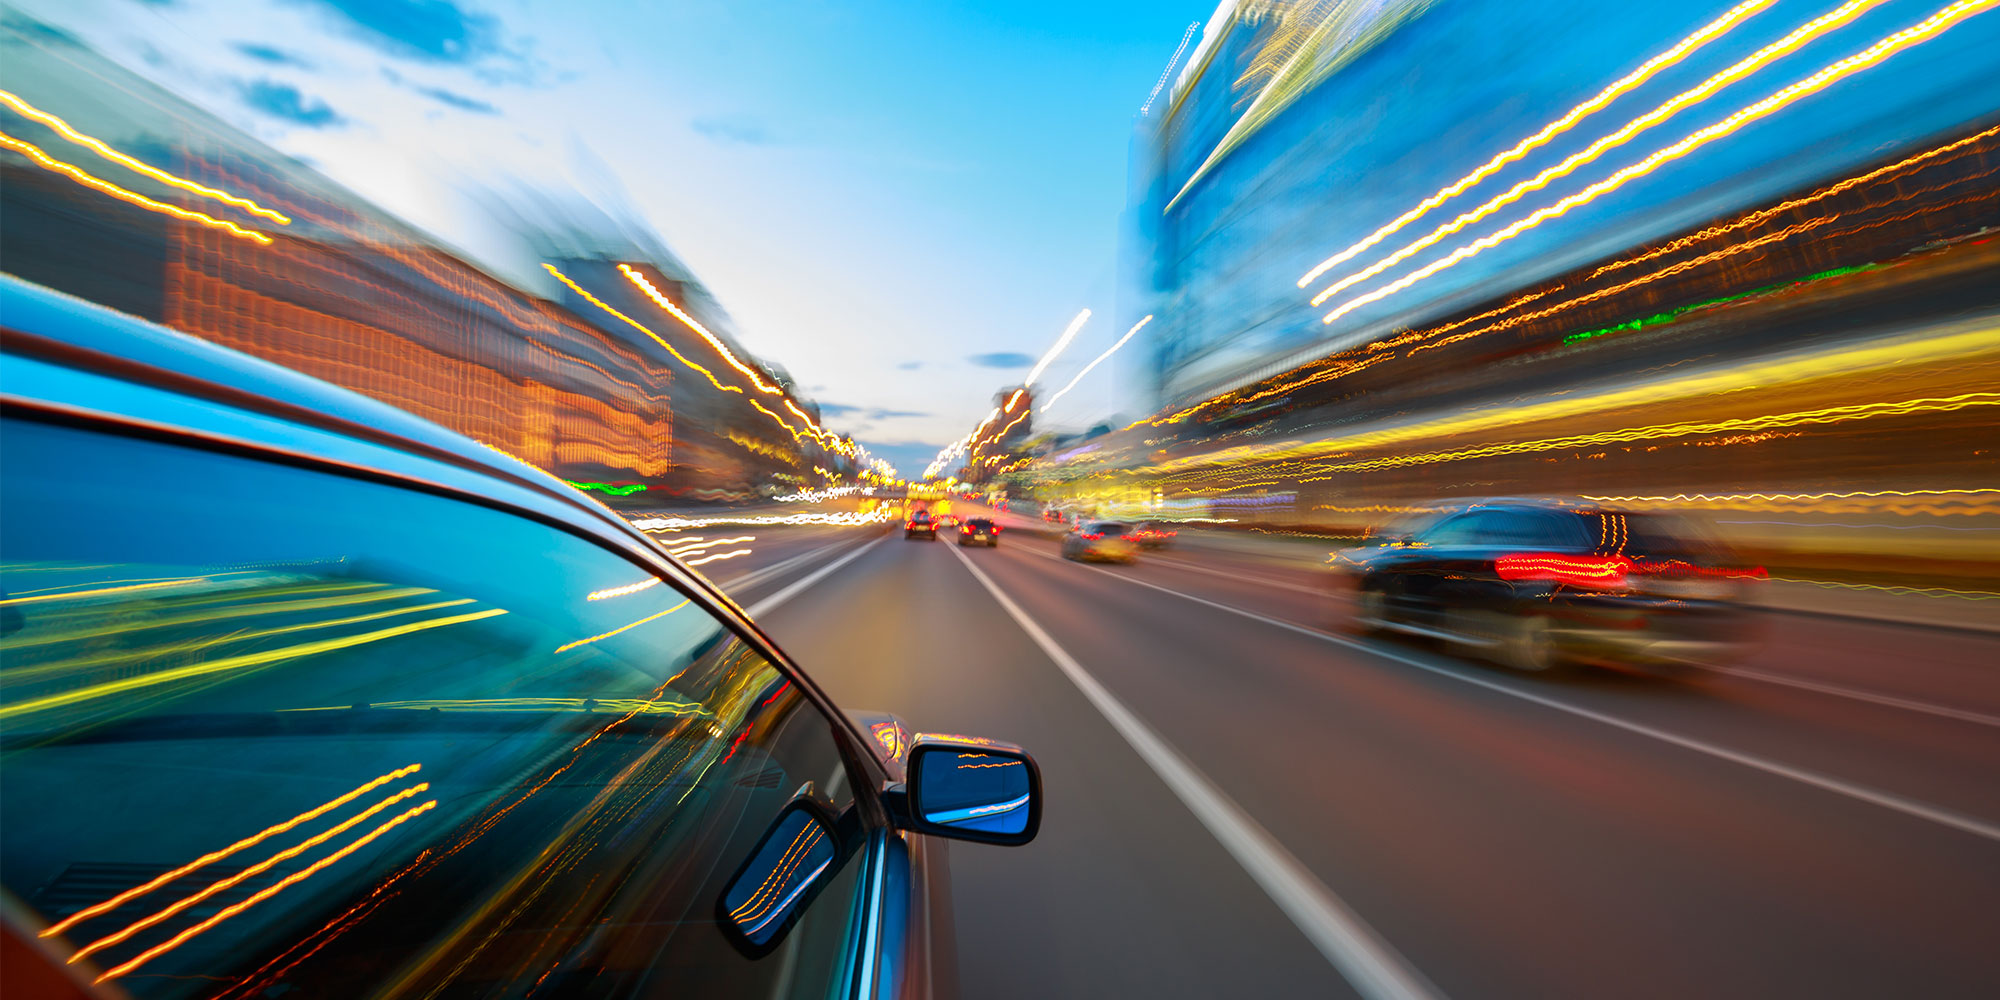 Speeding and Aggressive Driving Cause Accidents